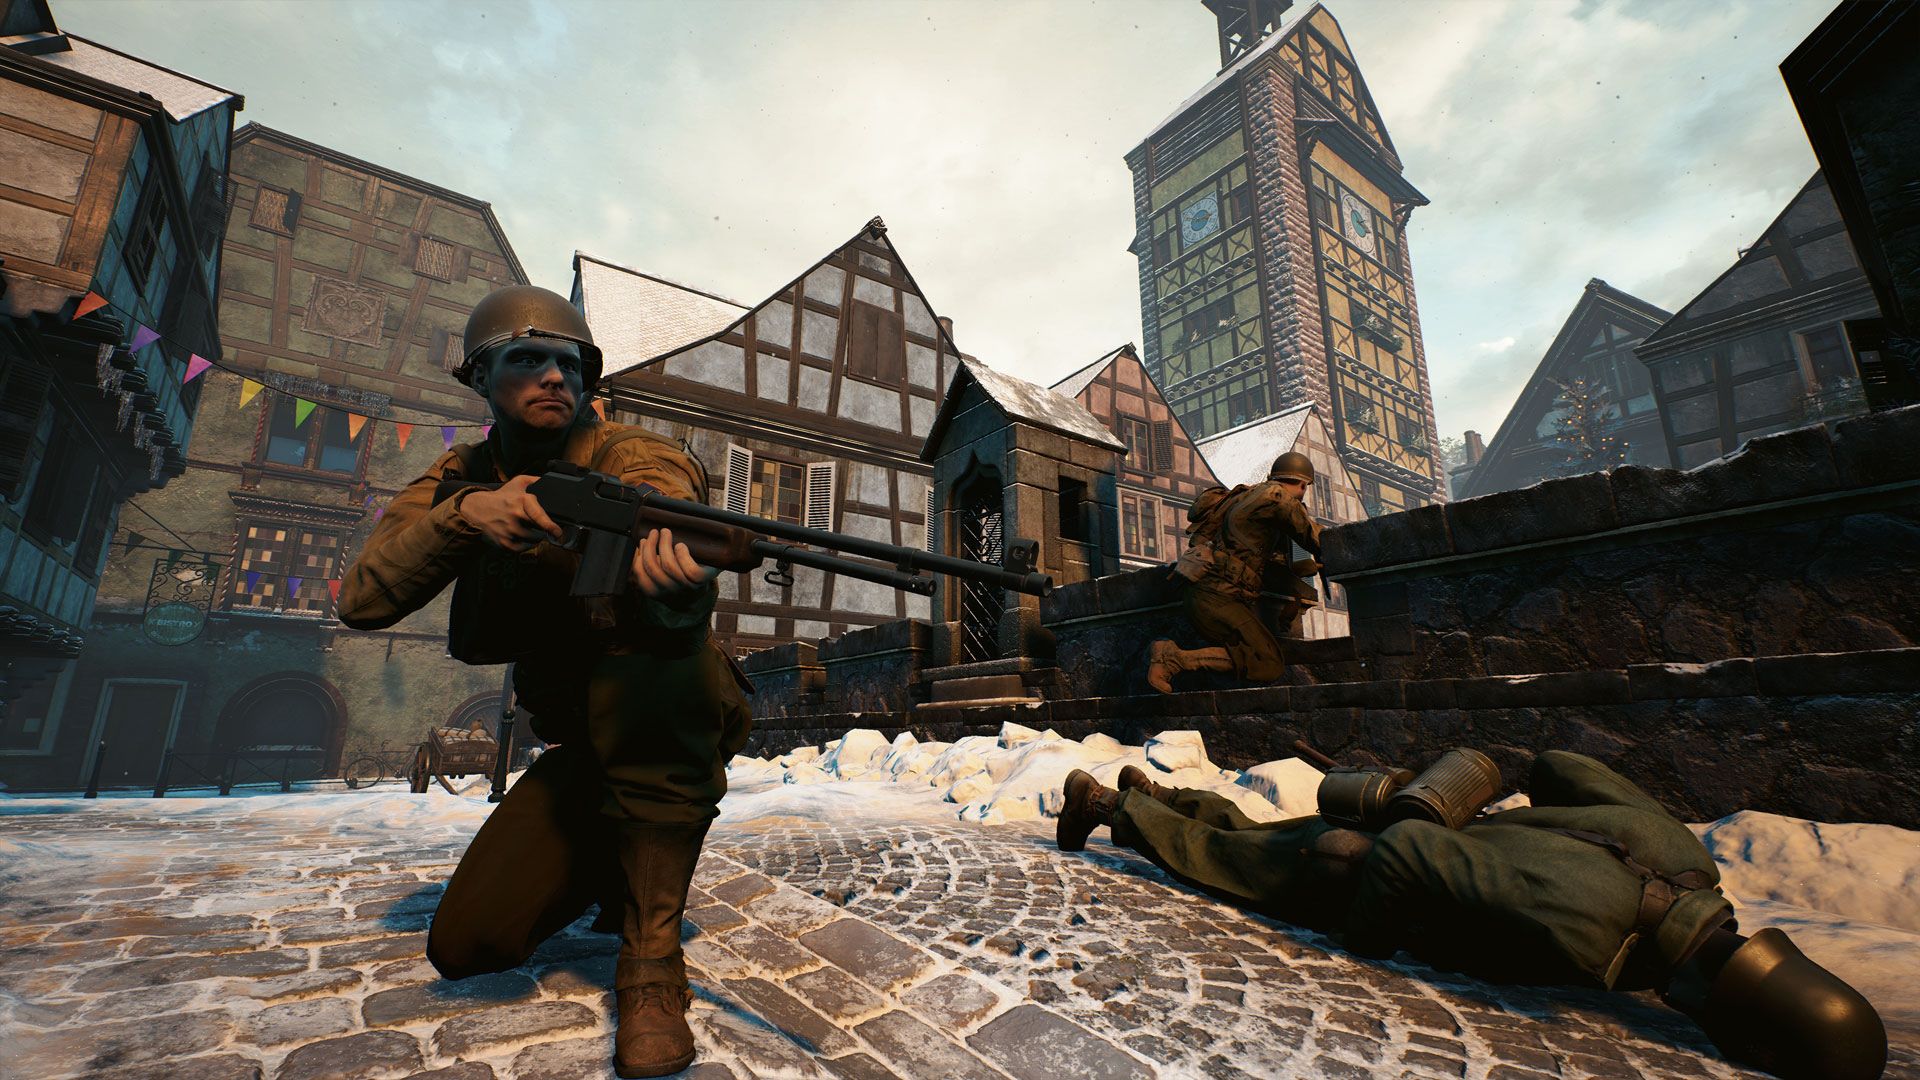 The game aims to have a higher skill ceiling than most shooters on the market, image via Driven Arts and Graffiti Games